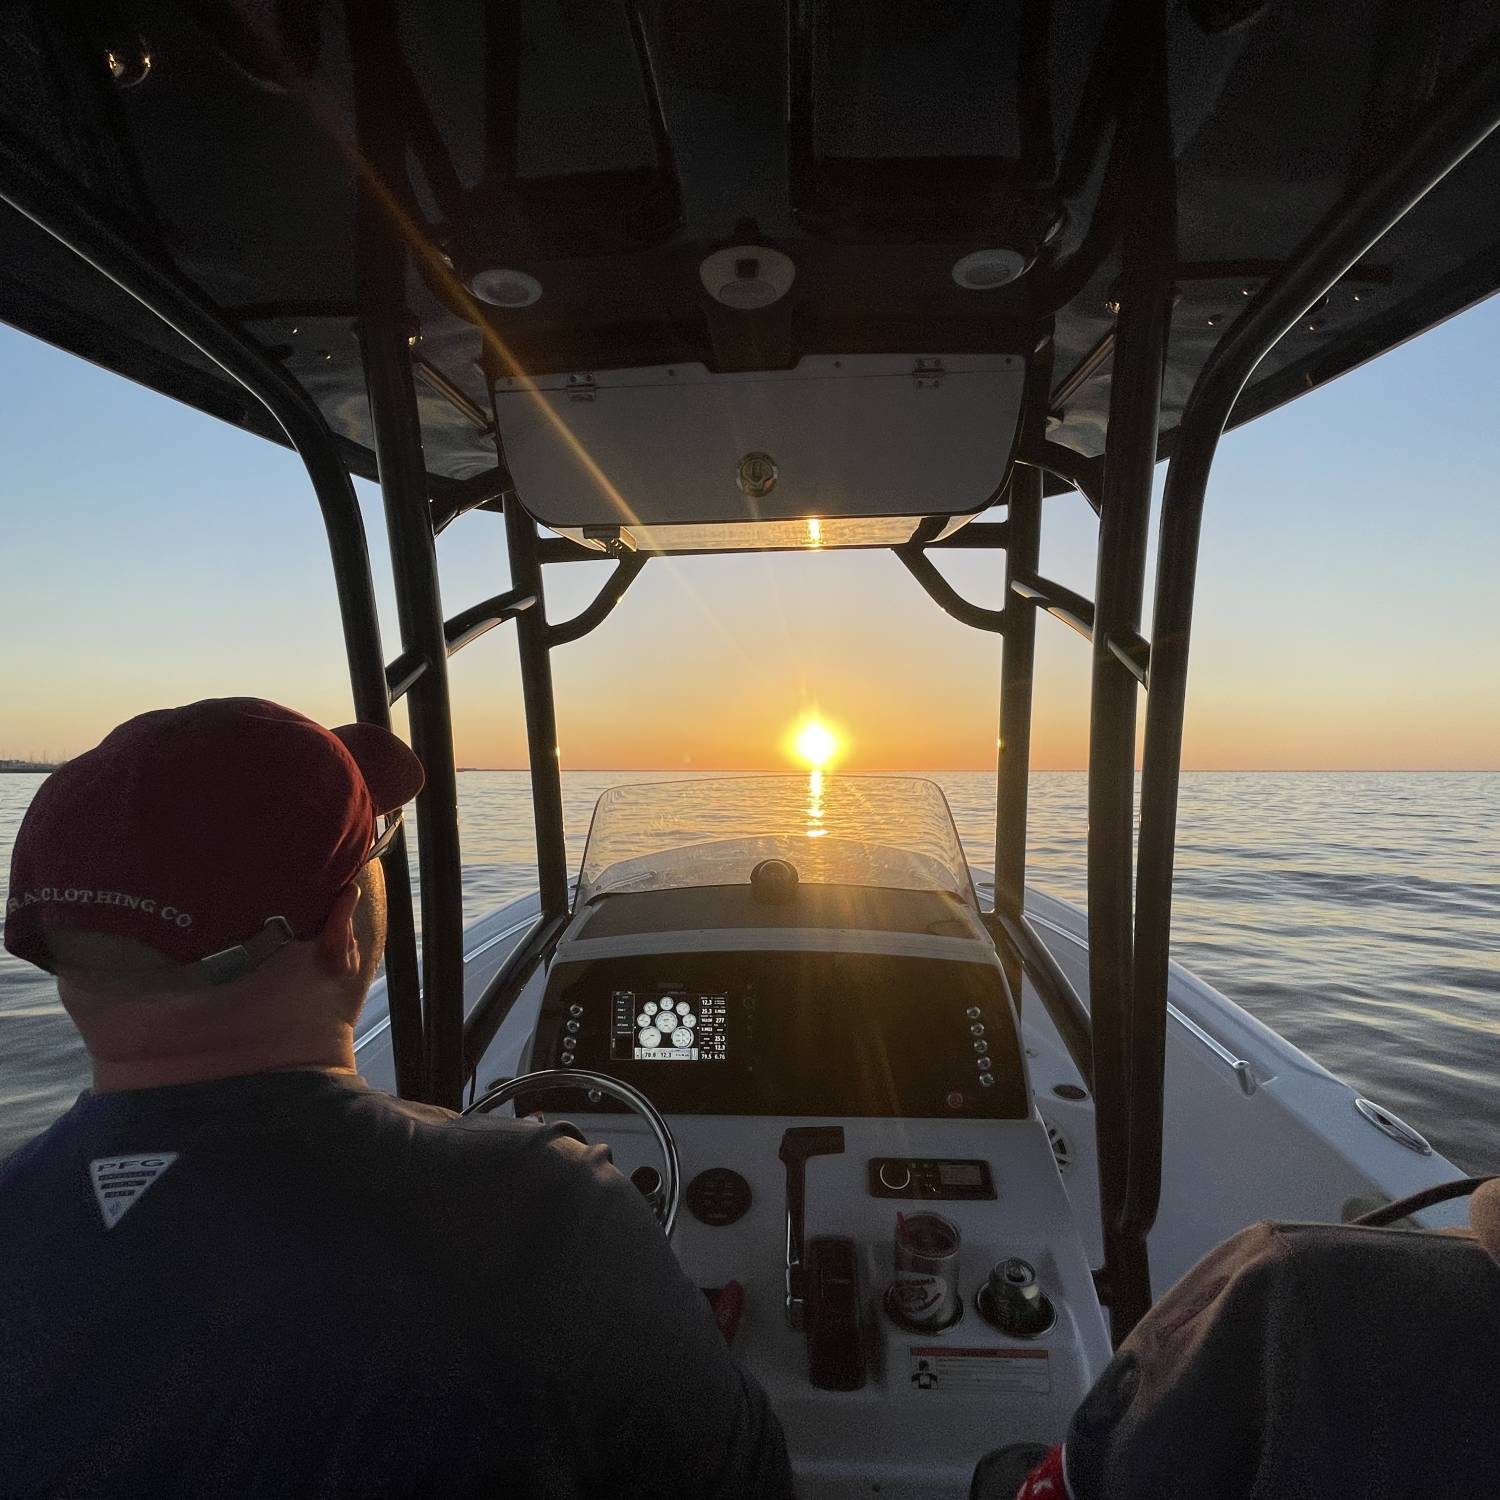 Title: Sunset in New Orleans. - On board their Sportsman Open 232 Center Console - Location: Lake Pontchartrain, New Orleans. Participating in the Photo Contest #SportsmanApril